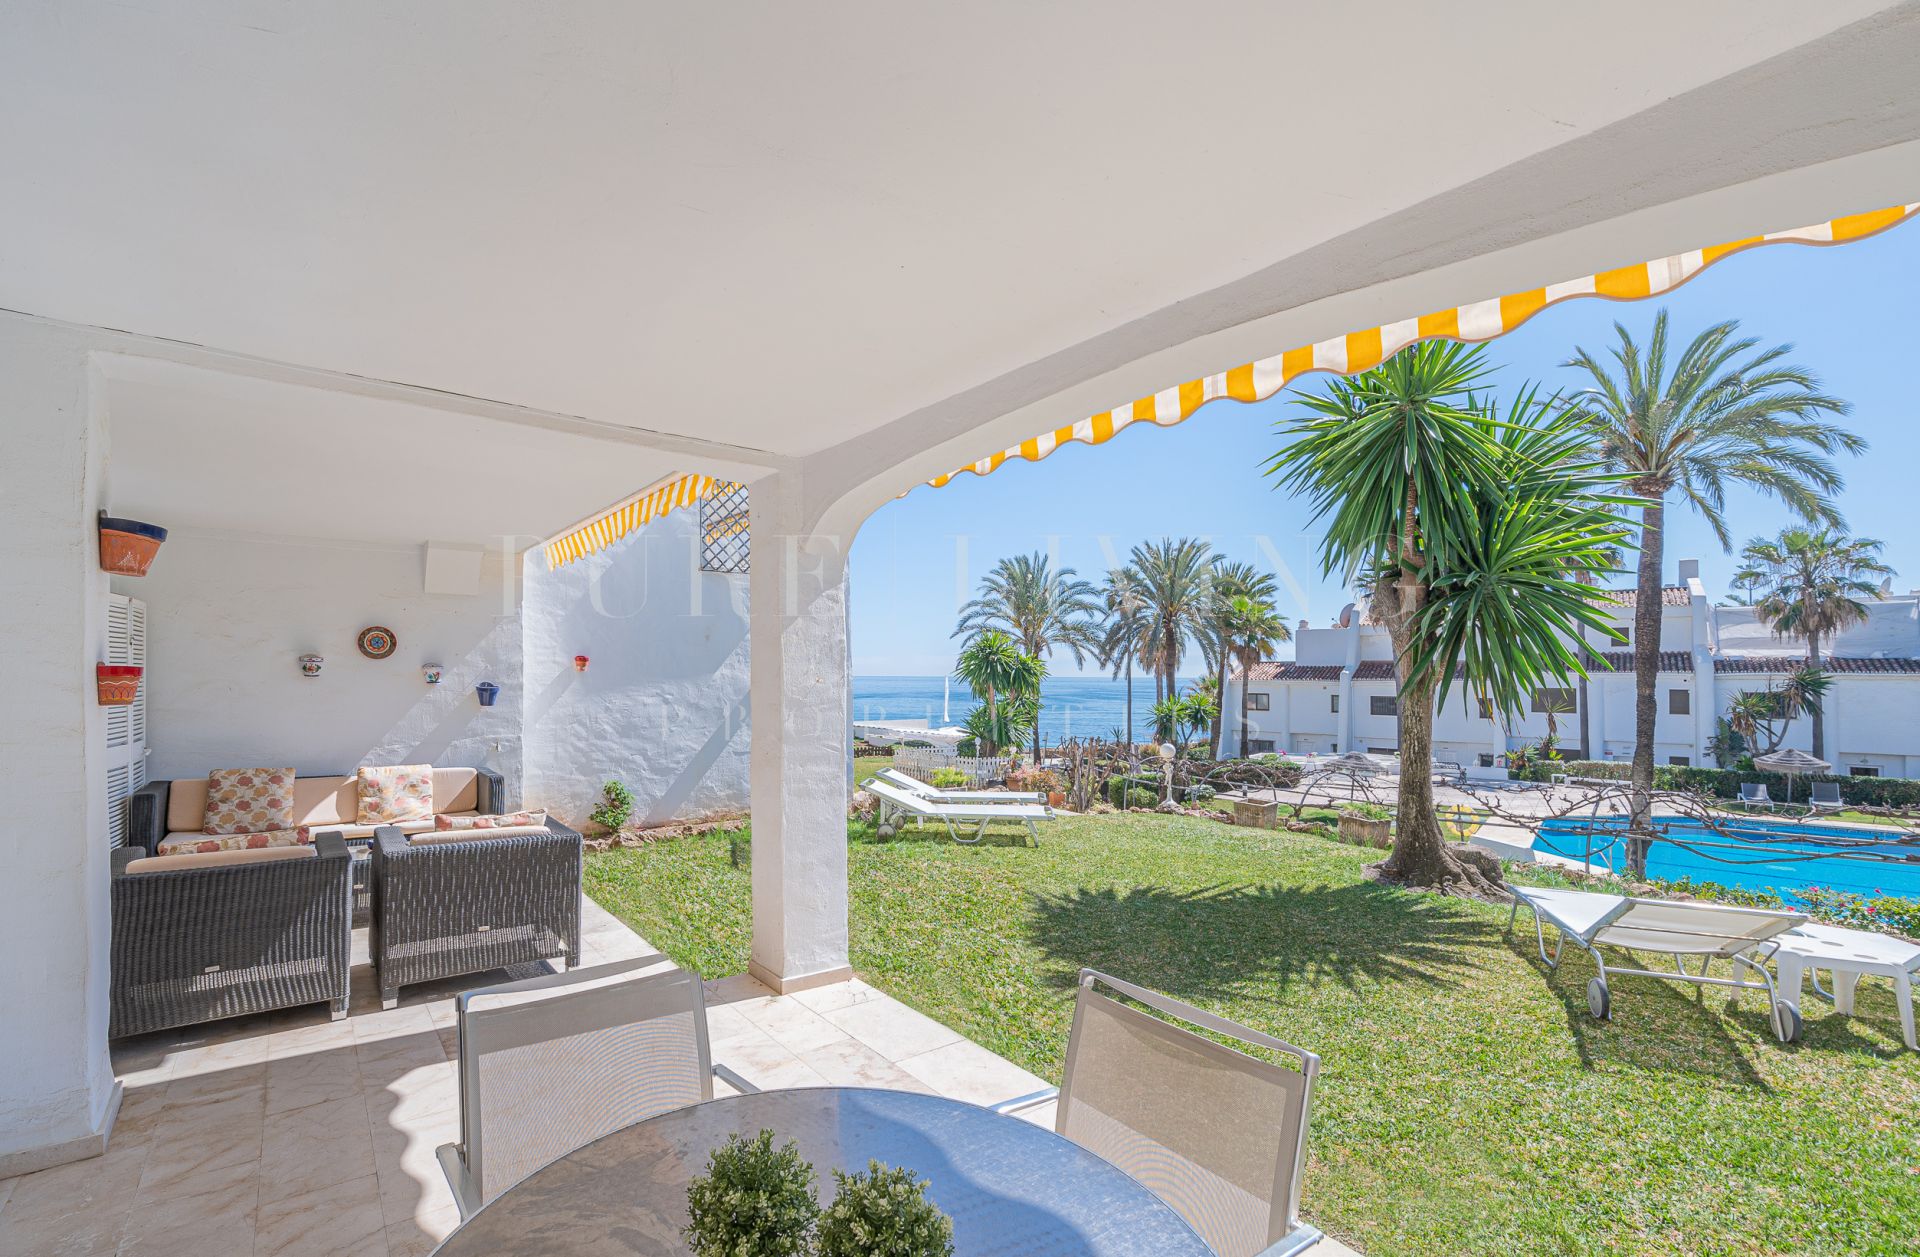 Fantastic two bedroom ground floor frontline beach apartment with private garden in Coral Beach